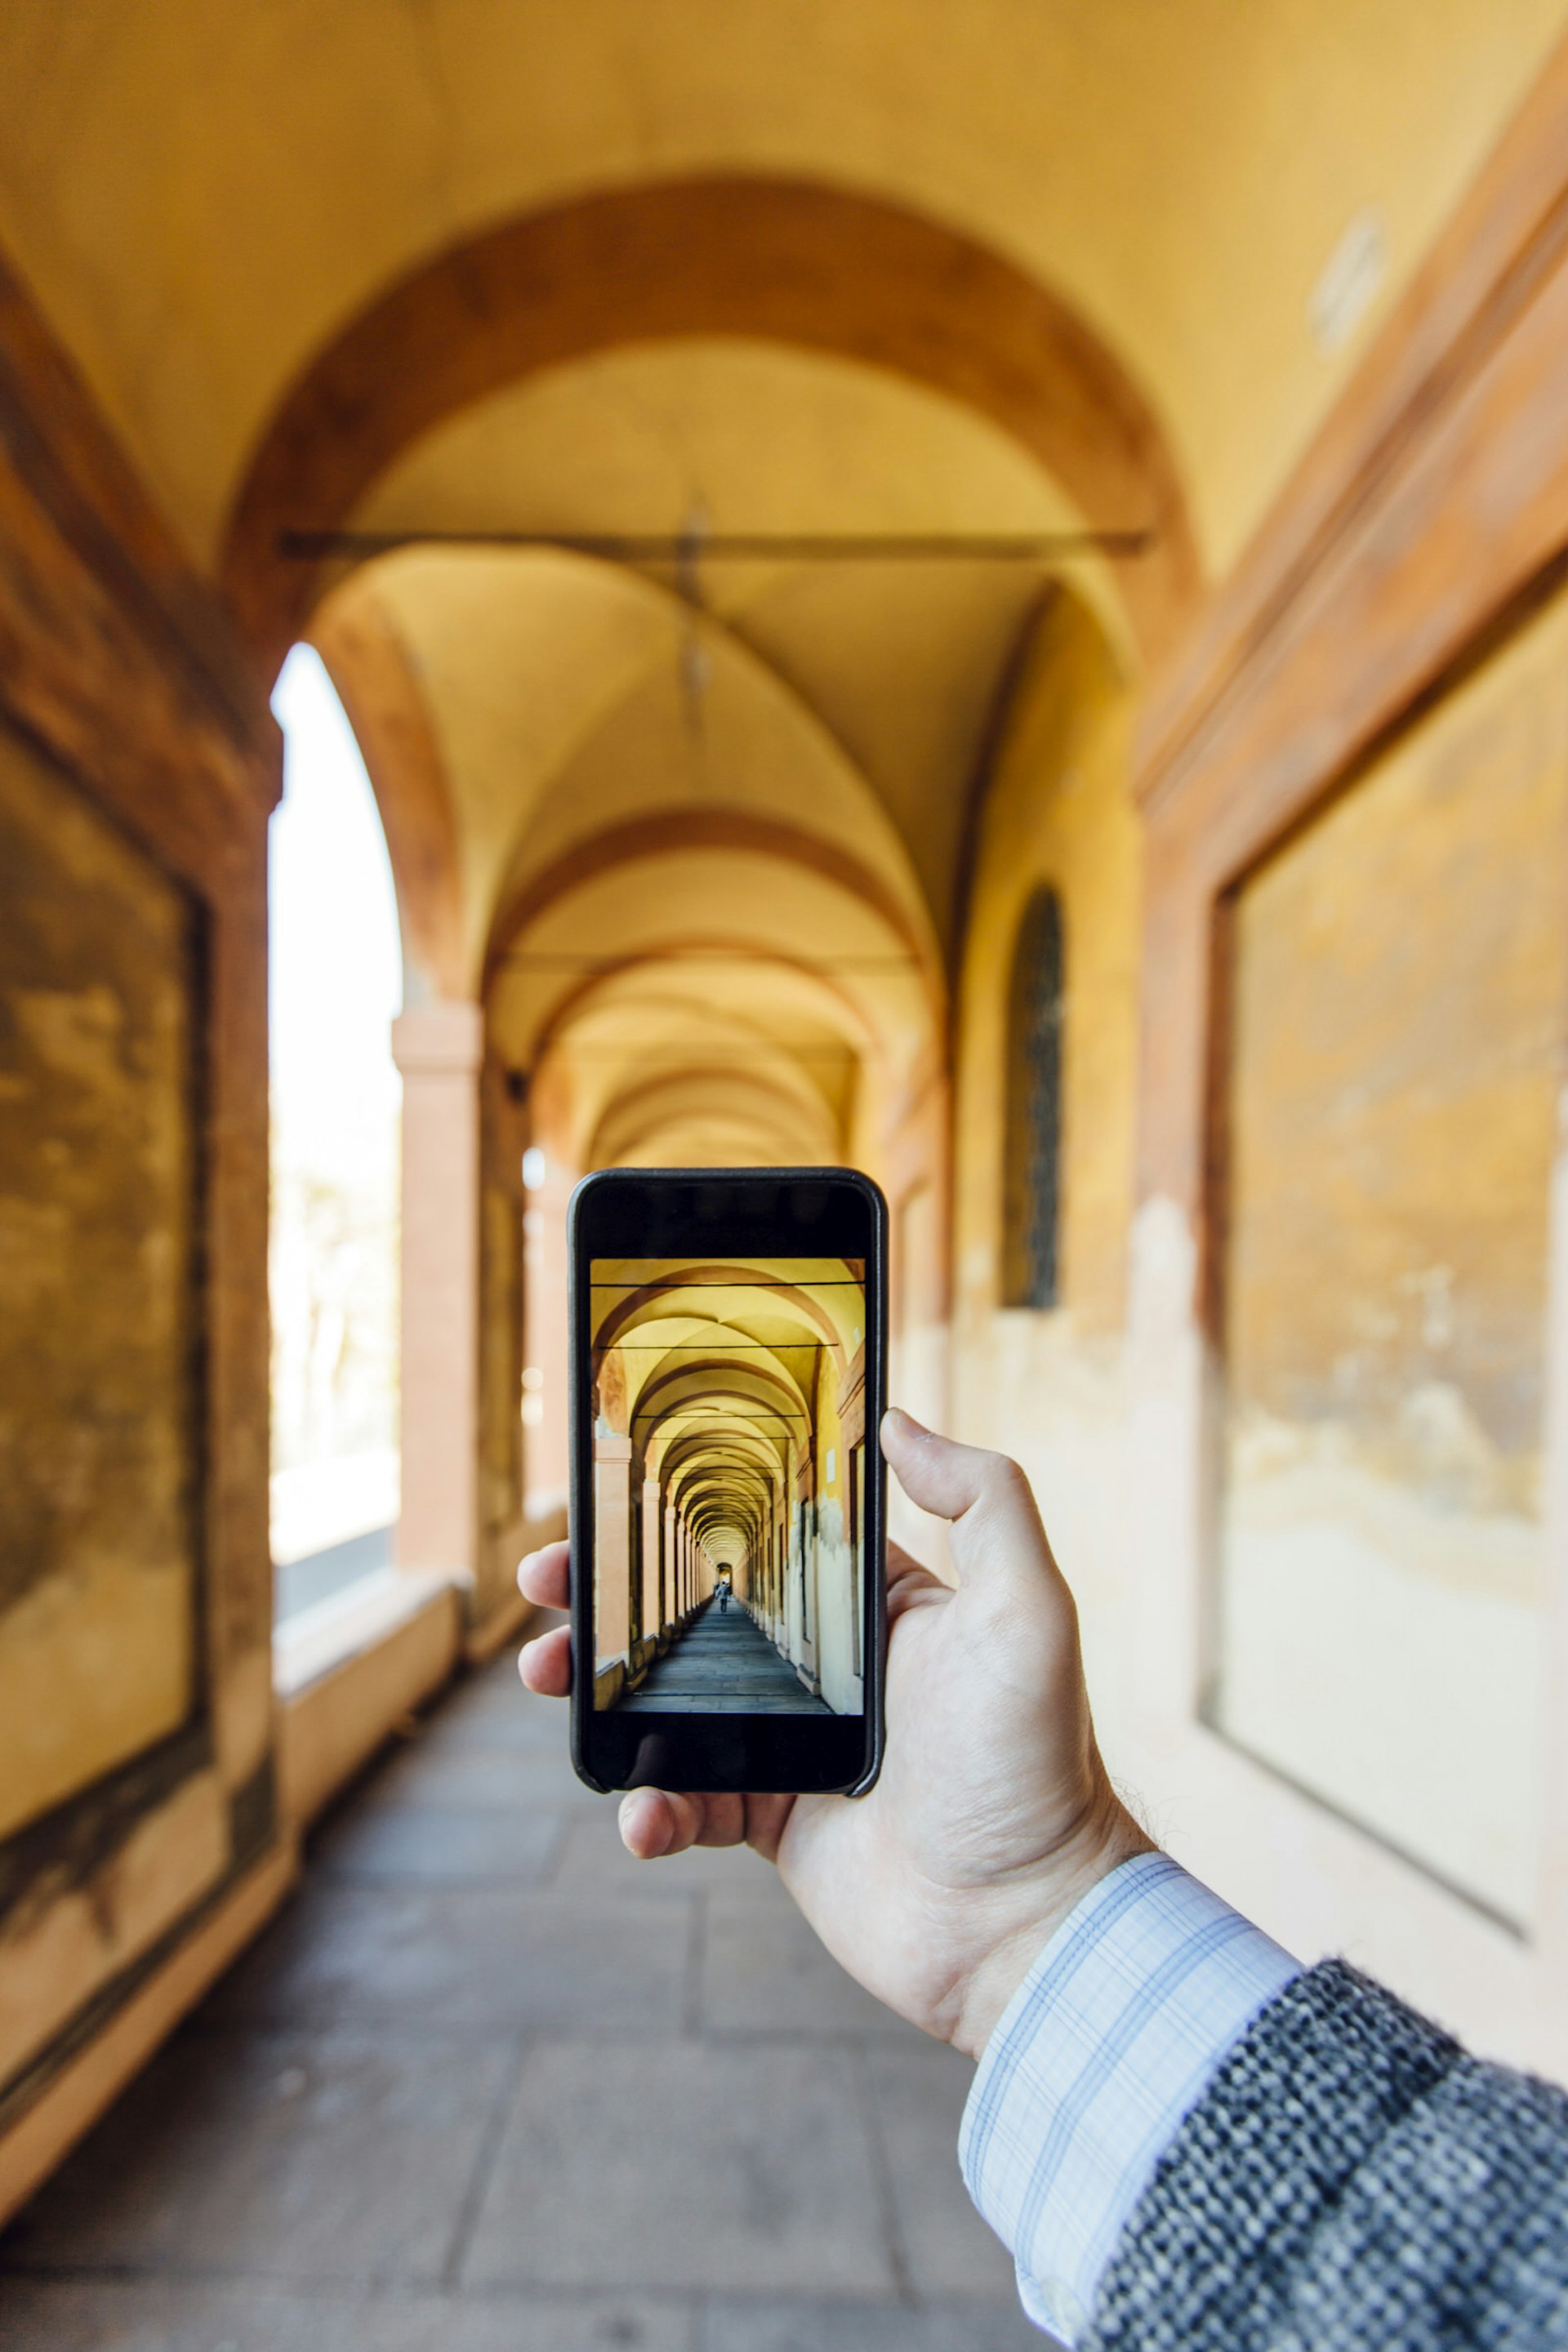 A hand holds an iPhone to take a picture of some old, beautiful archways.